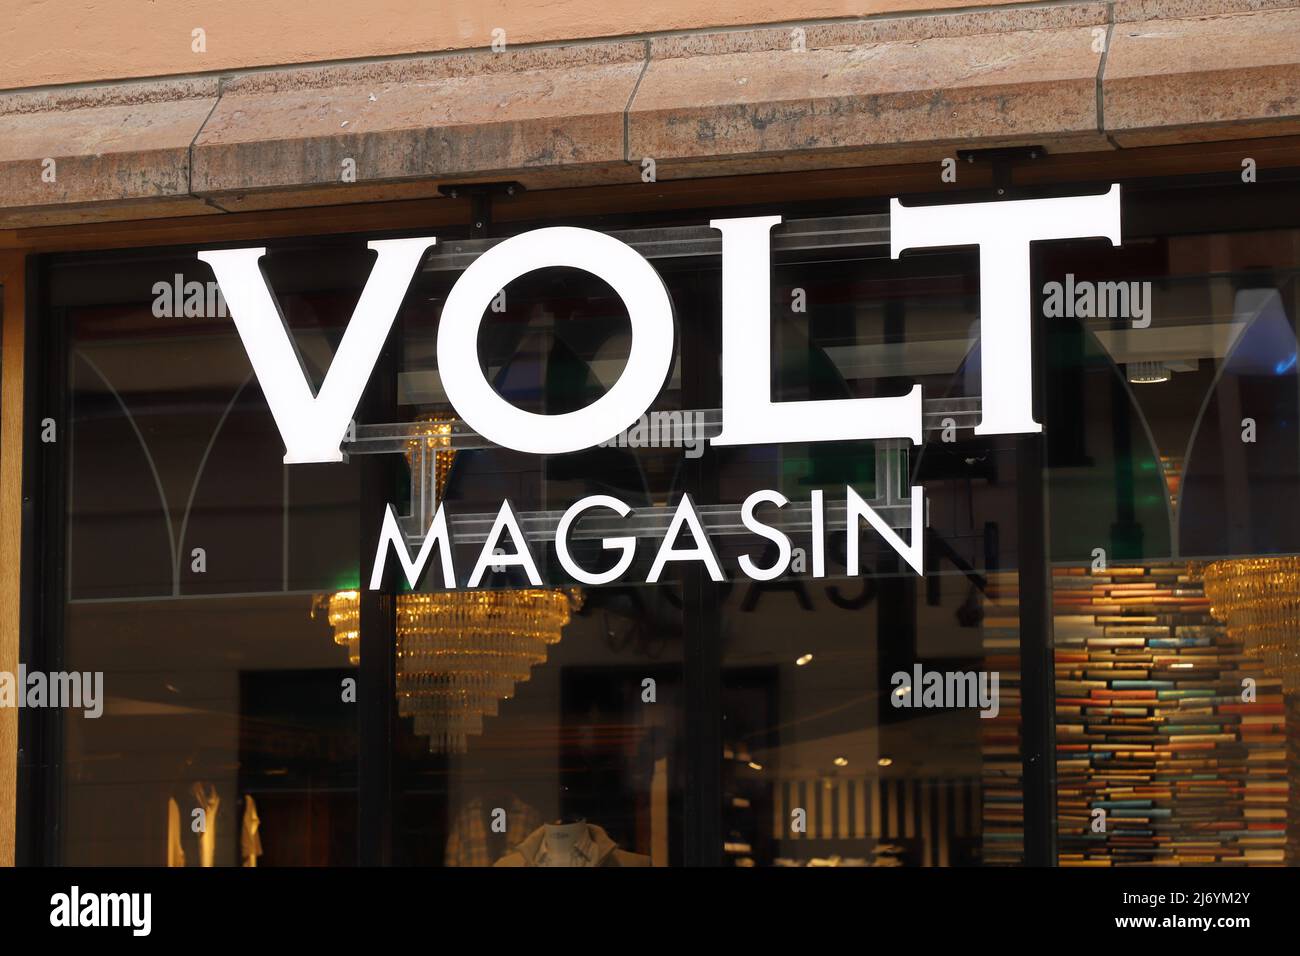 Orebro, Sweden - April 24, 2022: Close-up view of the Volt Magasin fashion store Volt Nagasib located at the Drottninggatan street in downtown Orebro. Stock Photo